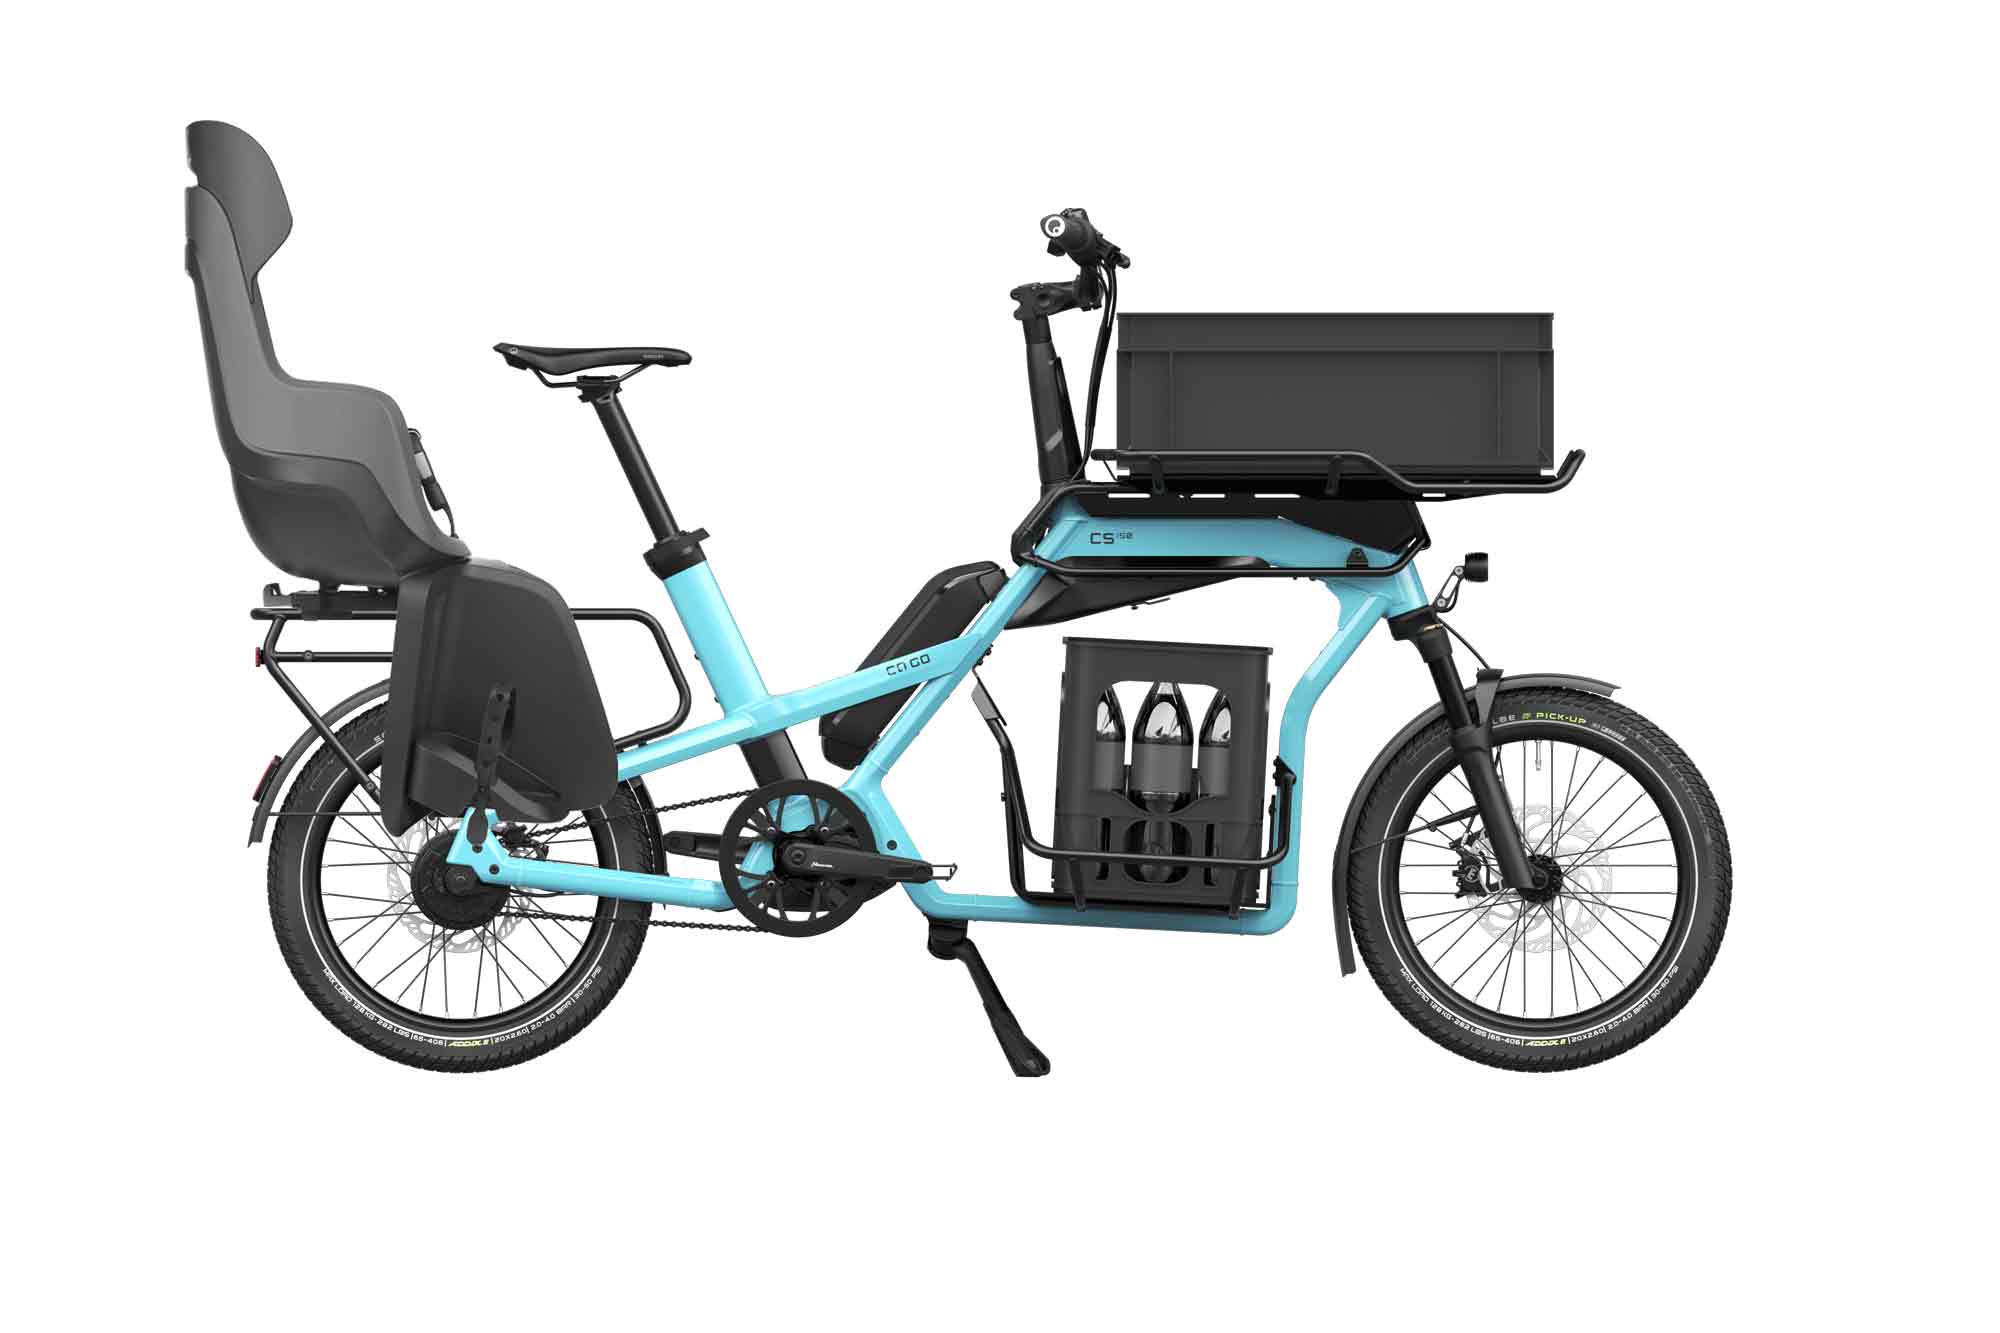 The cago mini cargo bike can do a whole lot! What this picture expresses well even without many words...